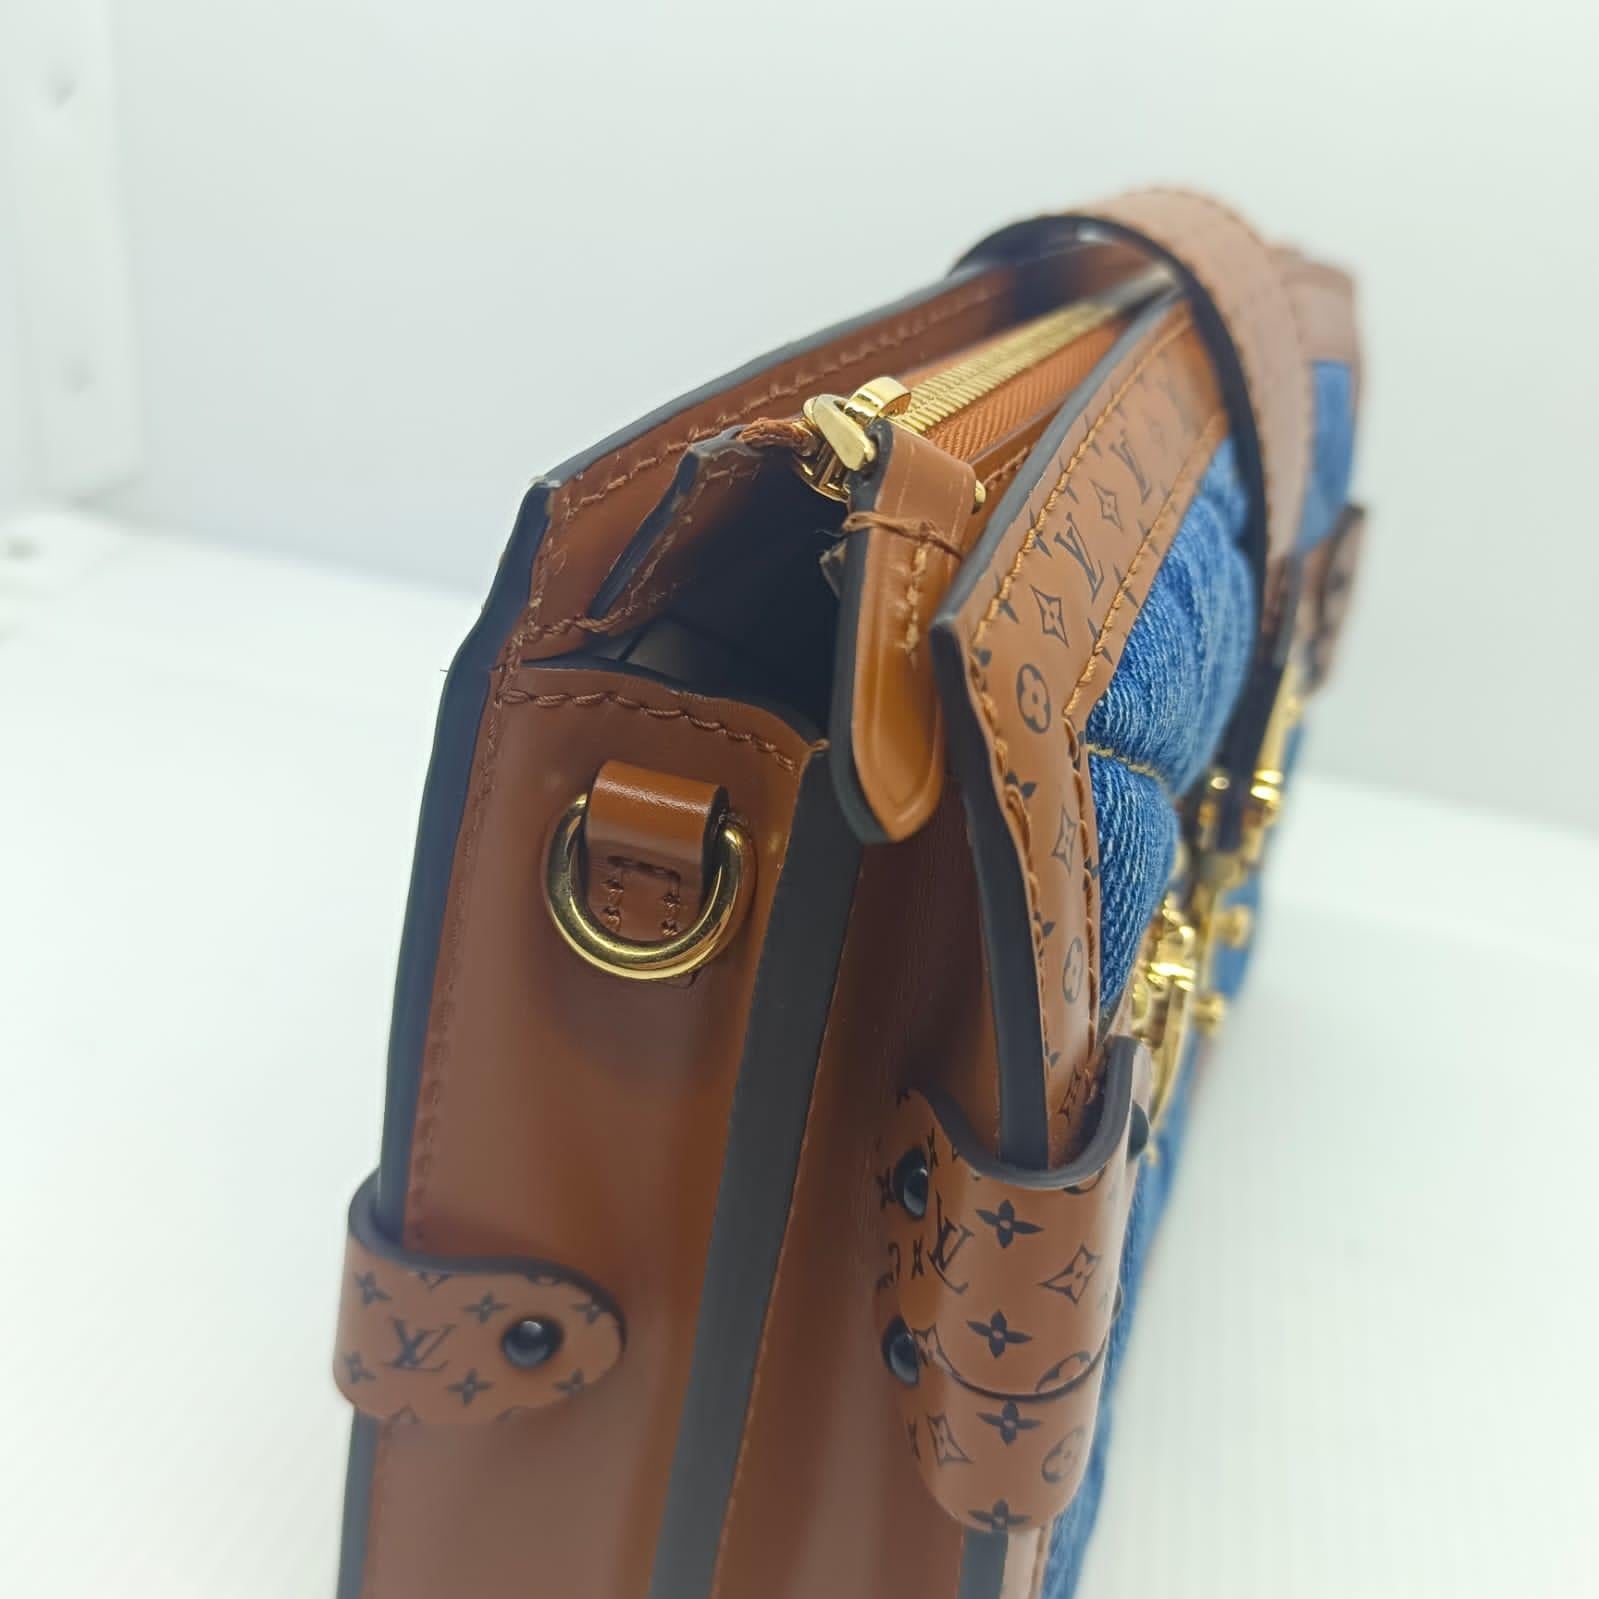 Louis Vuitton 2019 malletage denim trunk clutch bag. Overall in excellent condition, the only minor is scratches on the s lock hardware due to wear. No marks on the leather lining. Whimsy mini monogram design on the leather trims. Comes with its